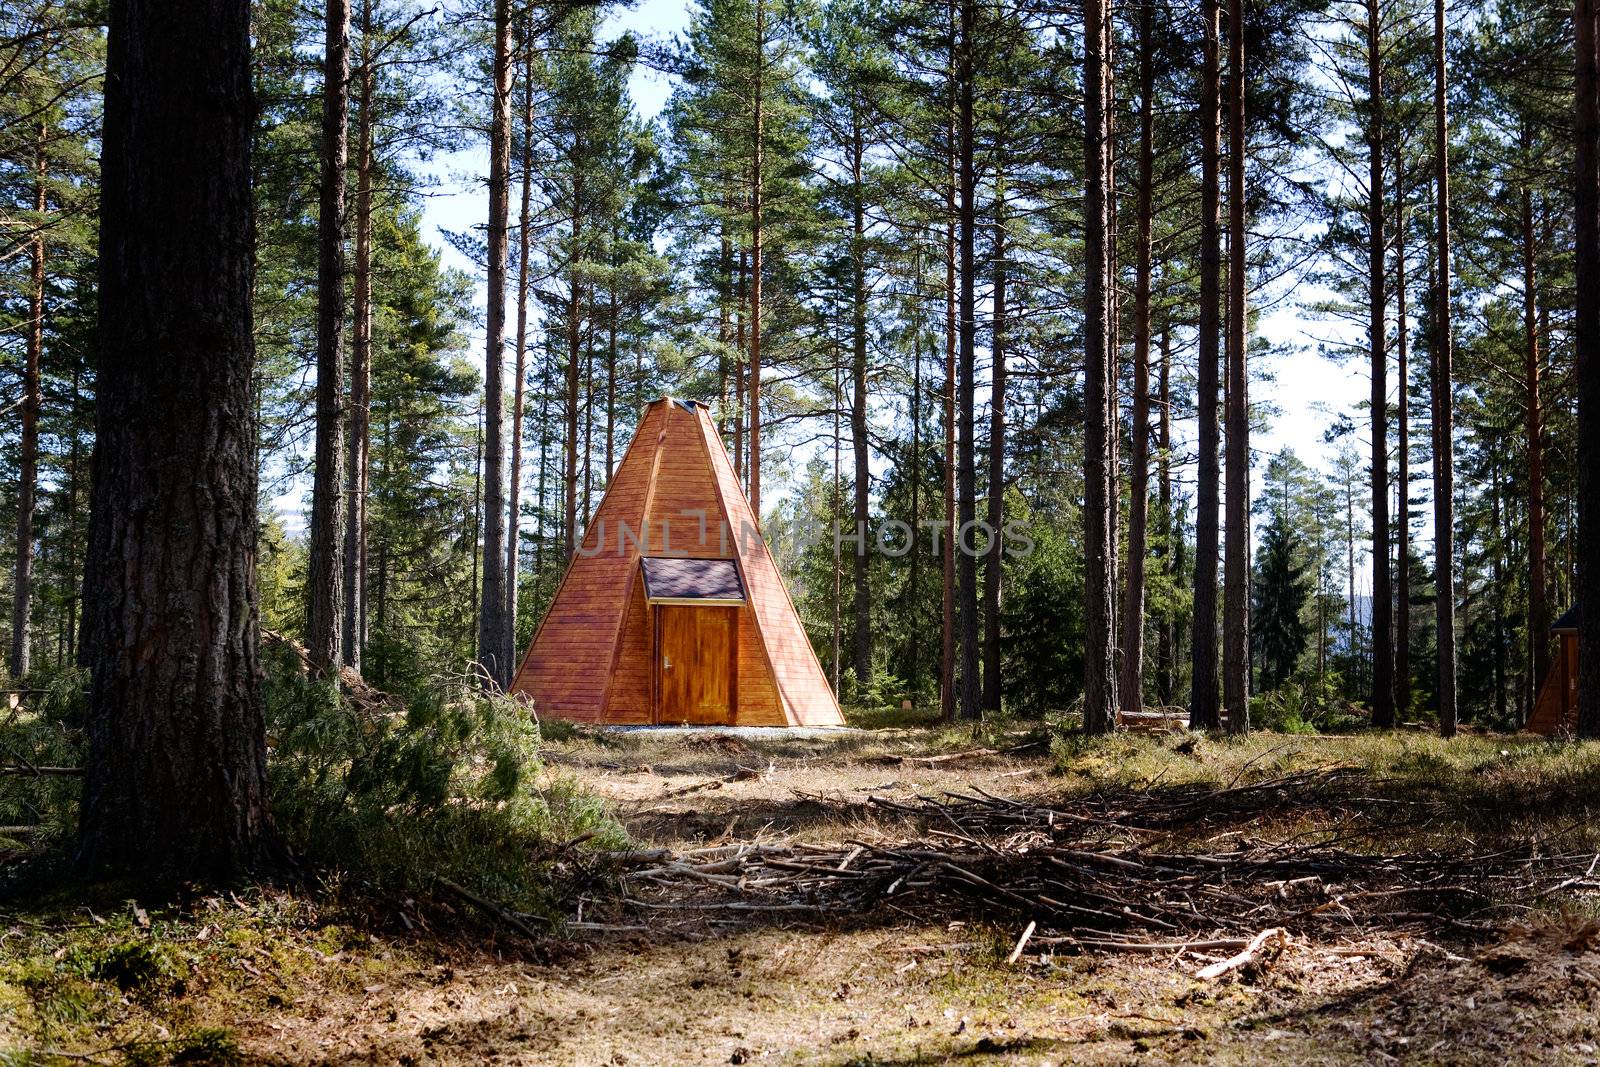 Teepee Cabin in Forest by leaf